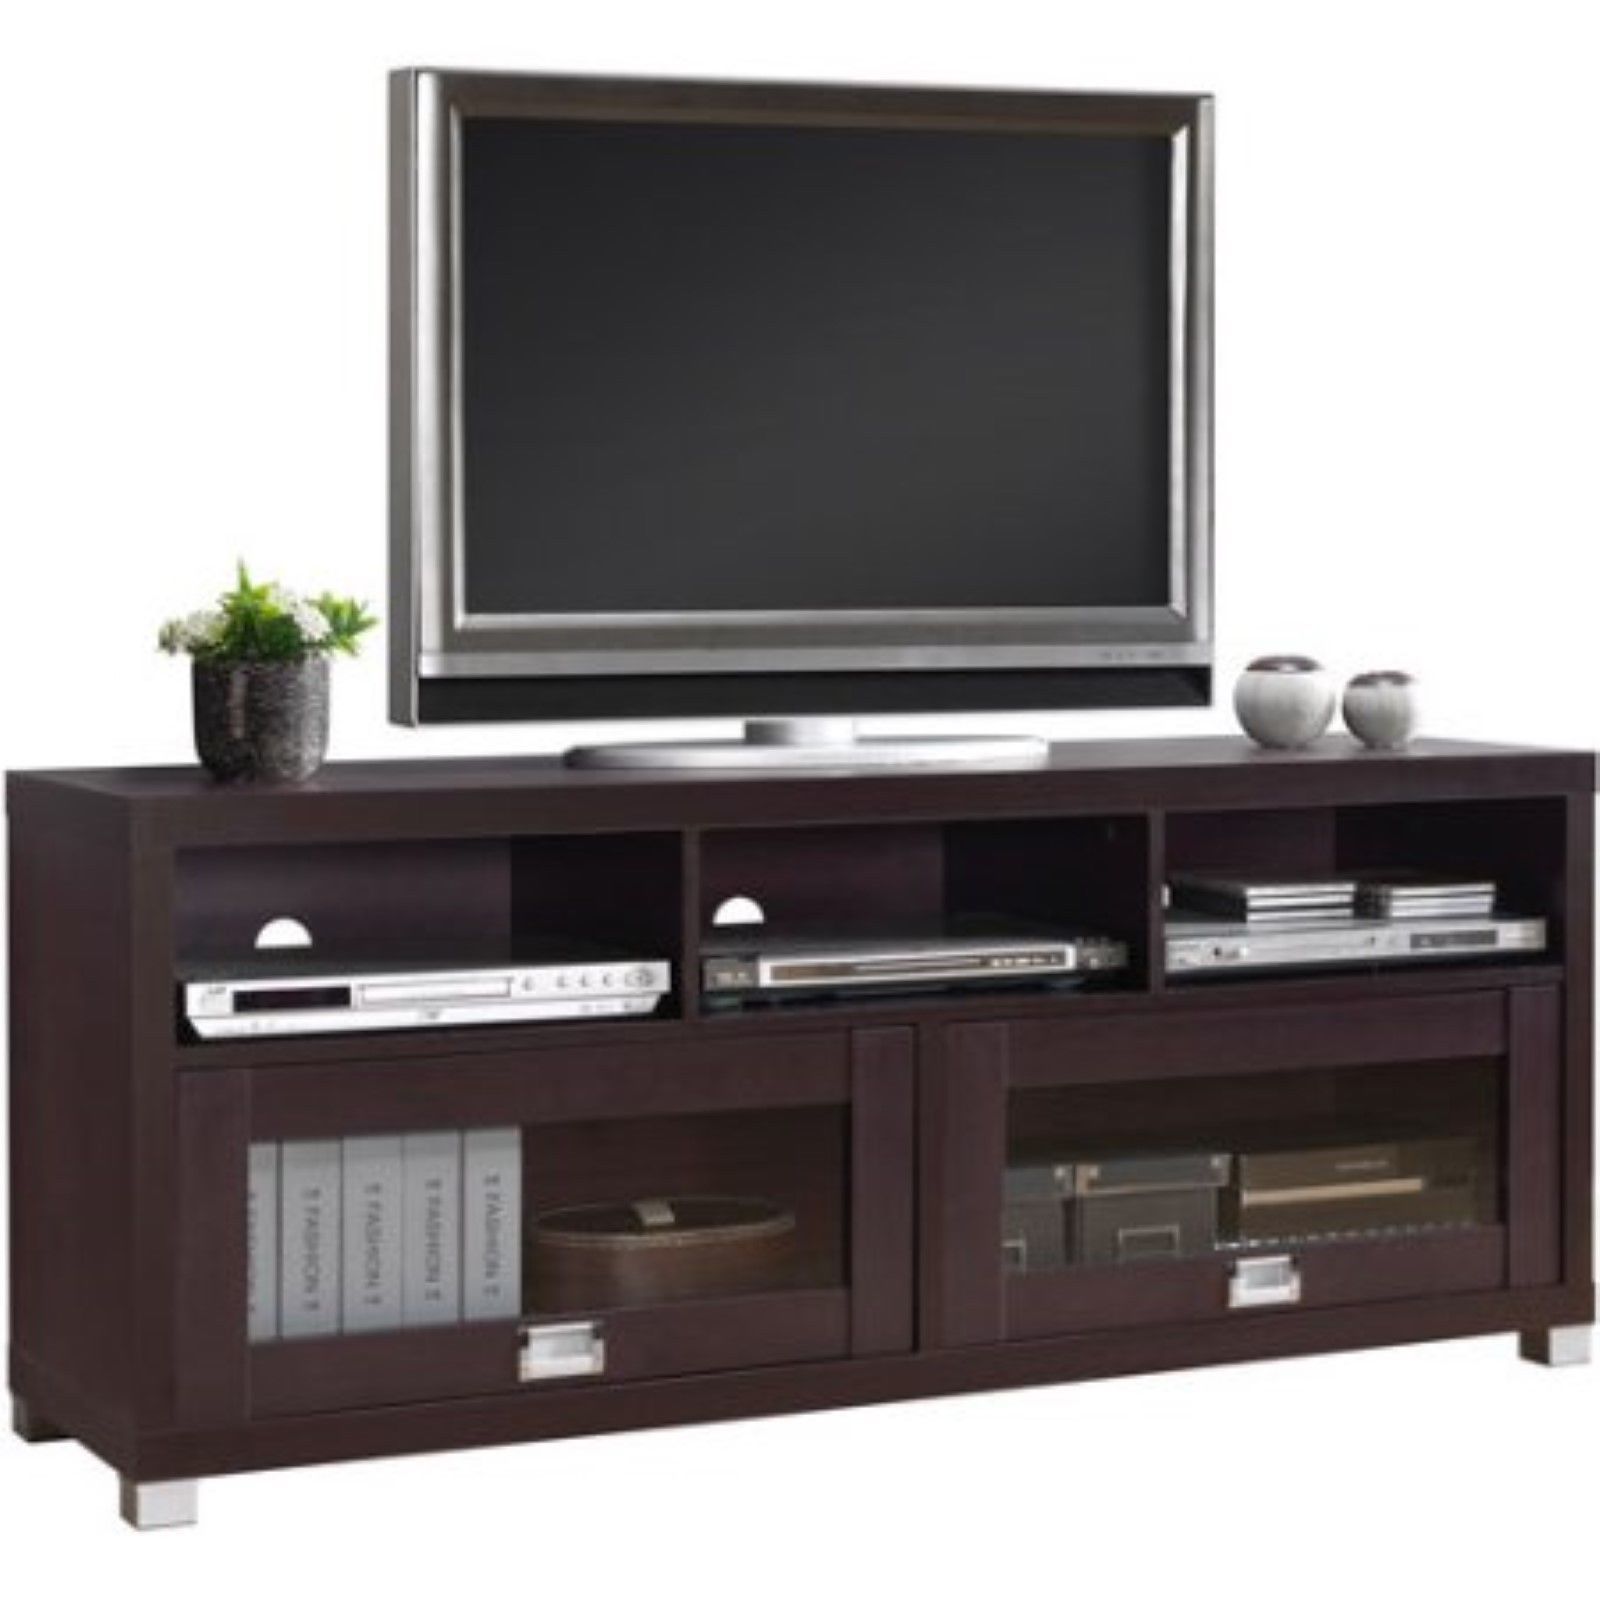 Tv Stand 65 Inch Flat Screen Home Furniture Entertainment Inside Modern Plasma Tv Stands (View 2 of 15)